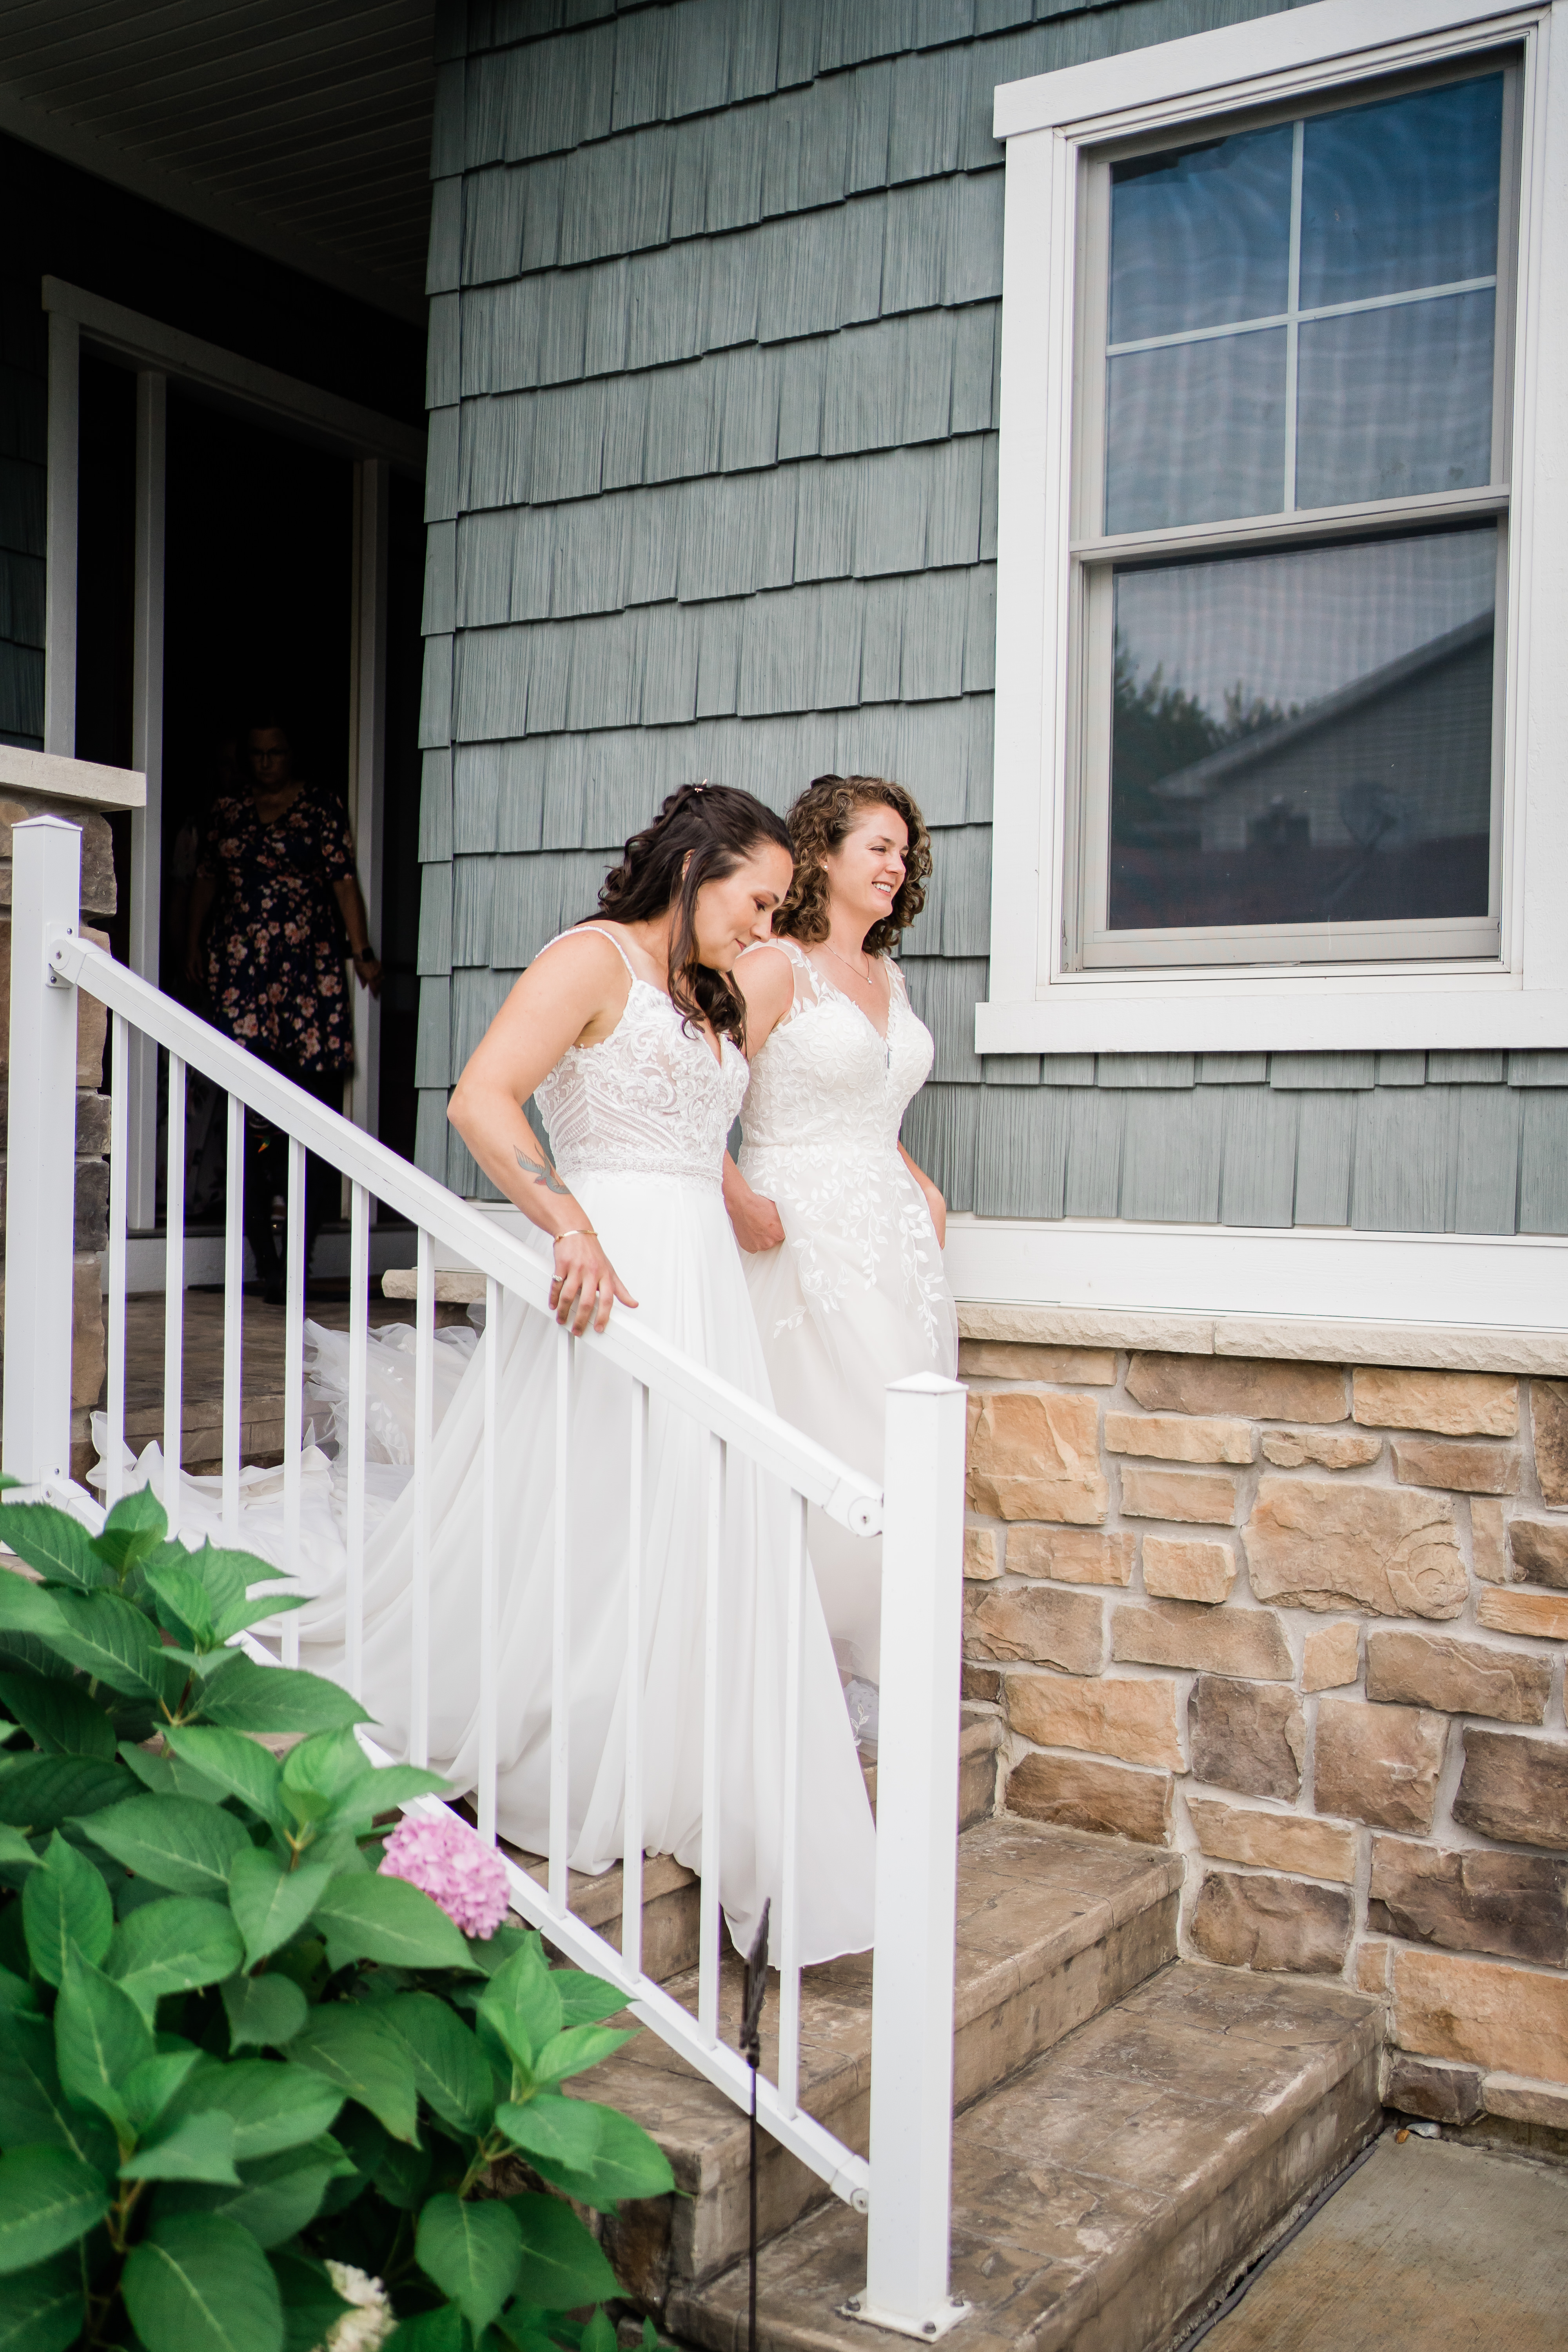 brides walking down steps together before first look with fathers